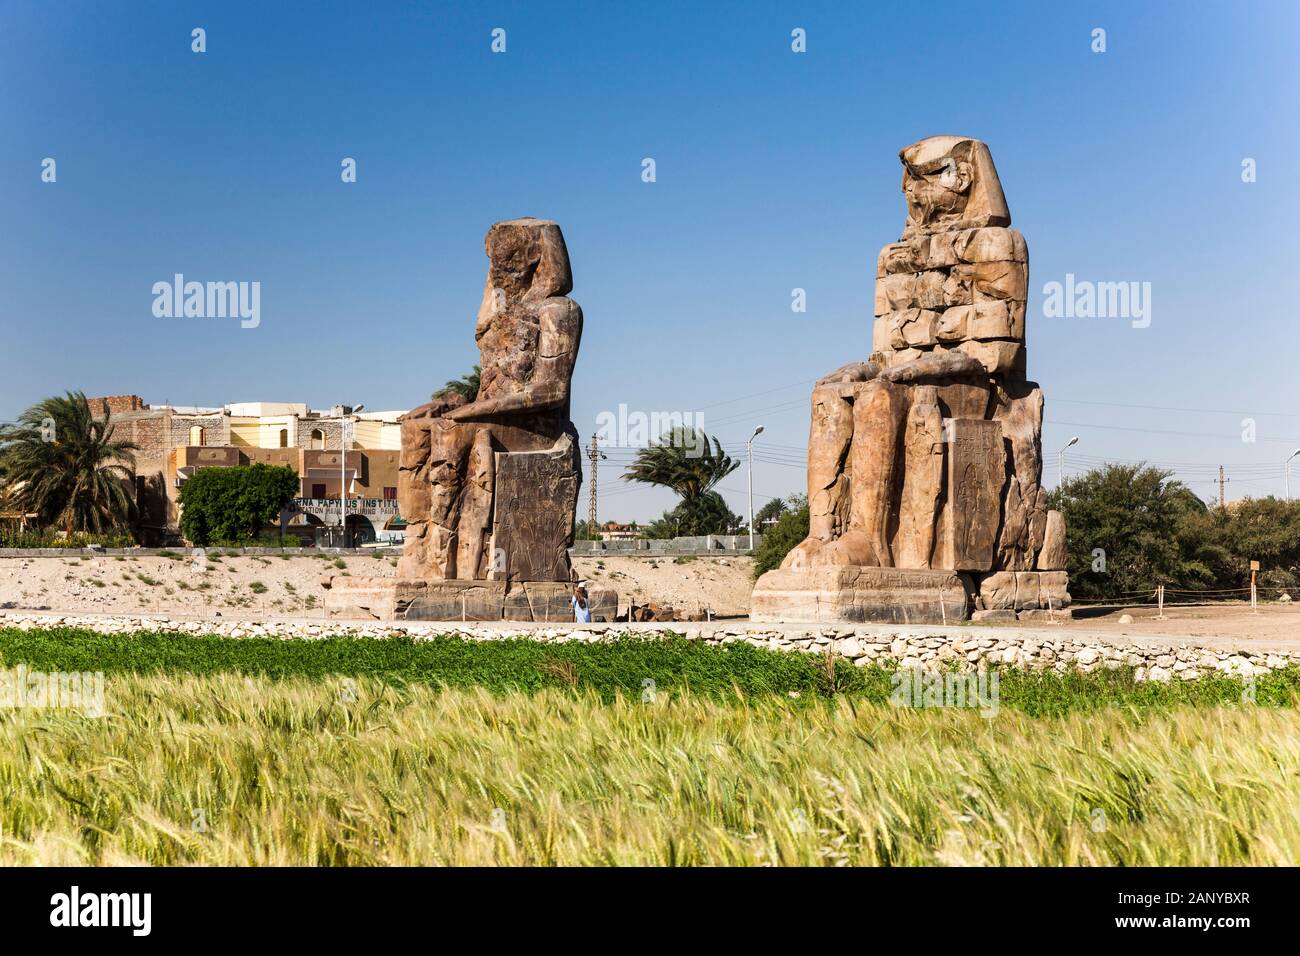 Colossi of Memnon,  massive stone statues of Amenhotep III, Luxor, Egypt, North Africa, Africa Stock Photo